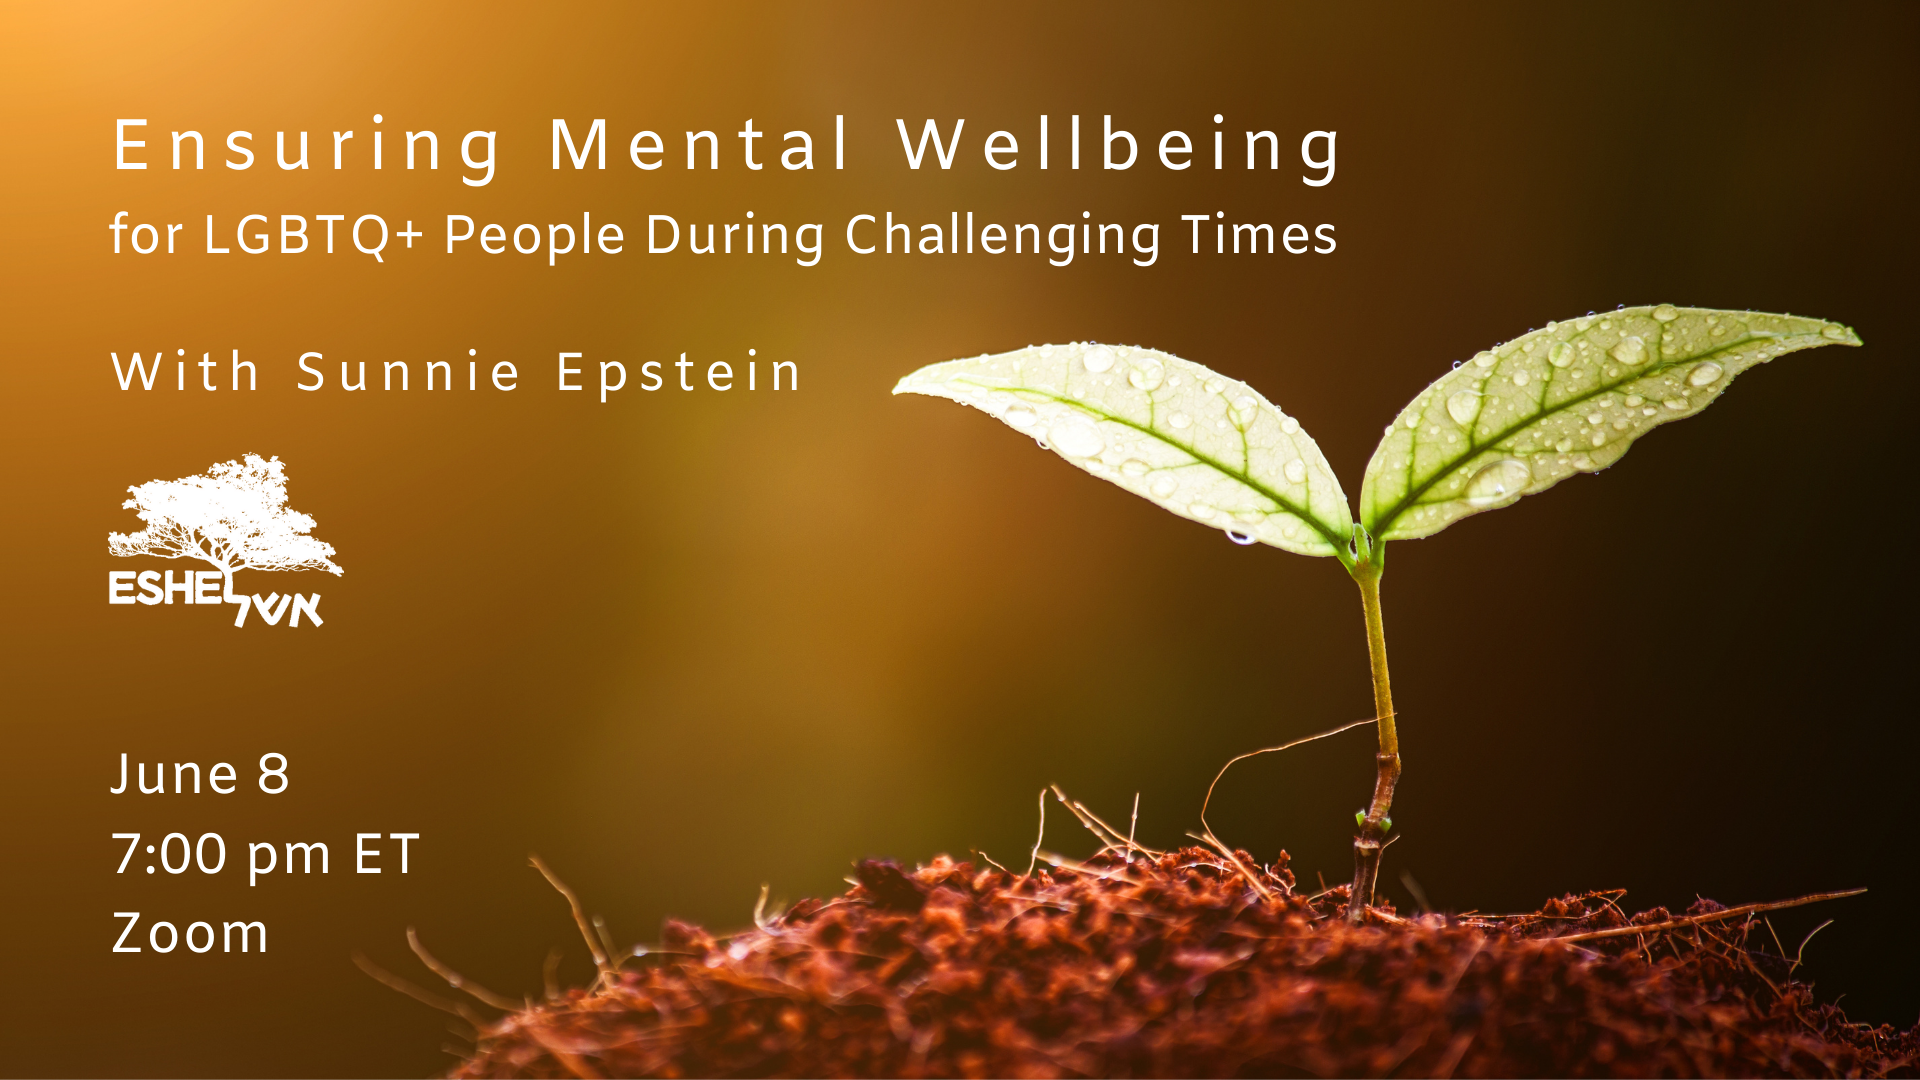 Ensuring Mental Wellbeing for LGBTQ+ People During Challenging Times event graphic